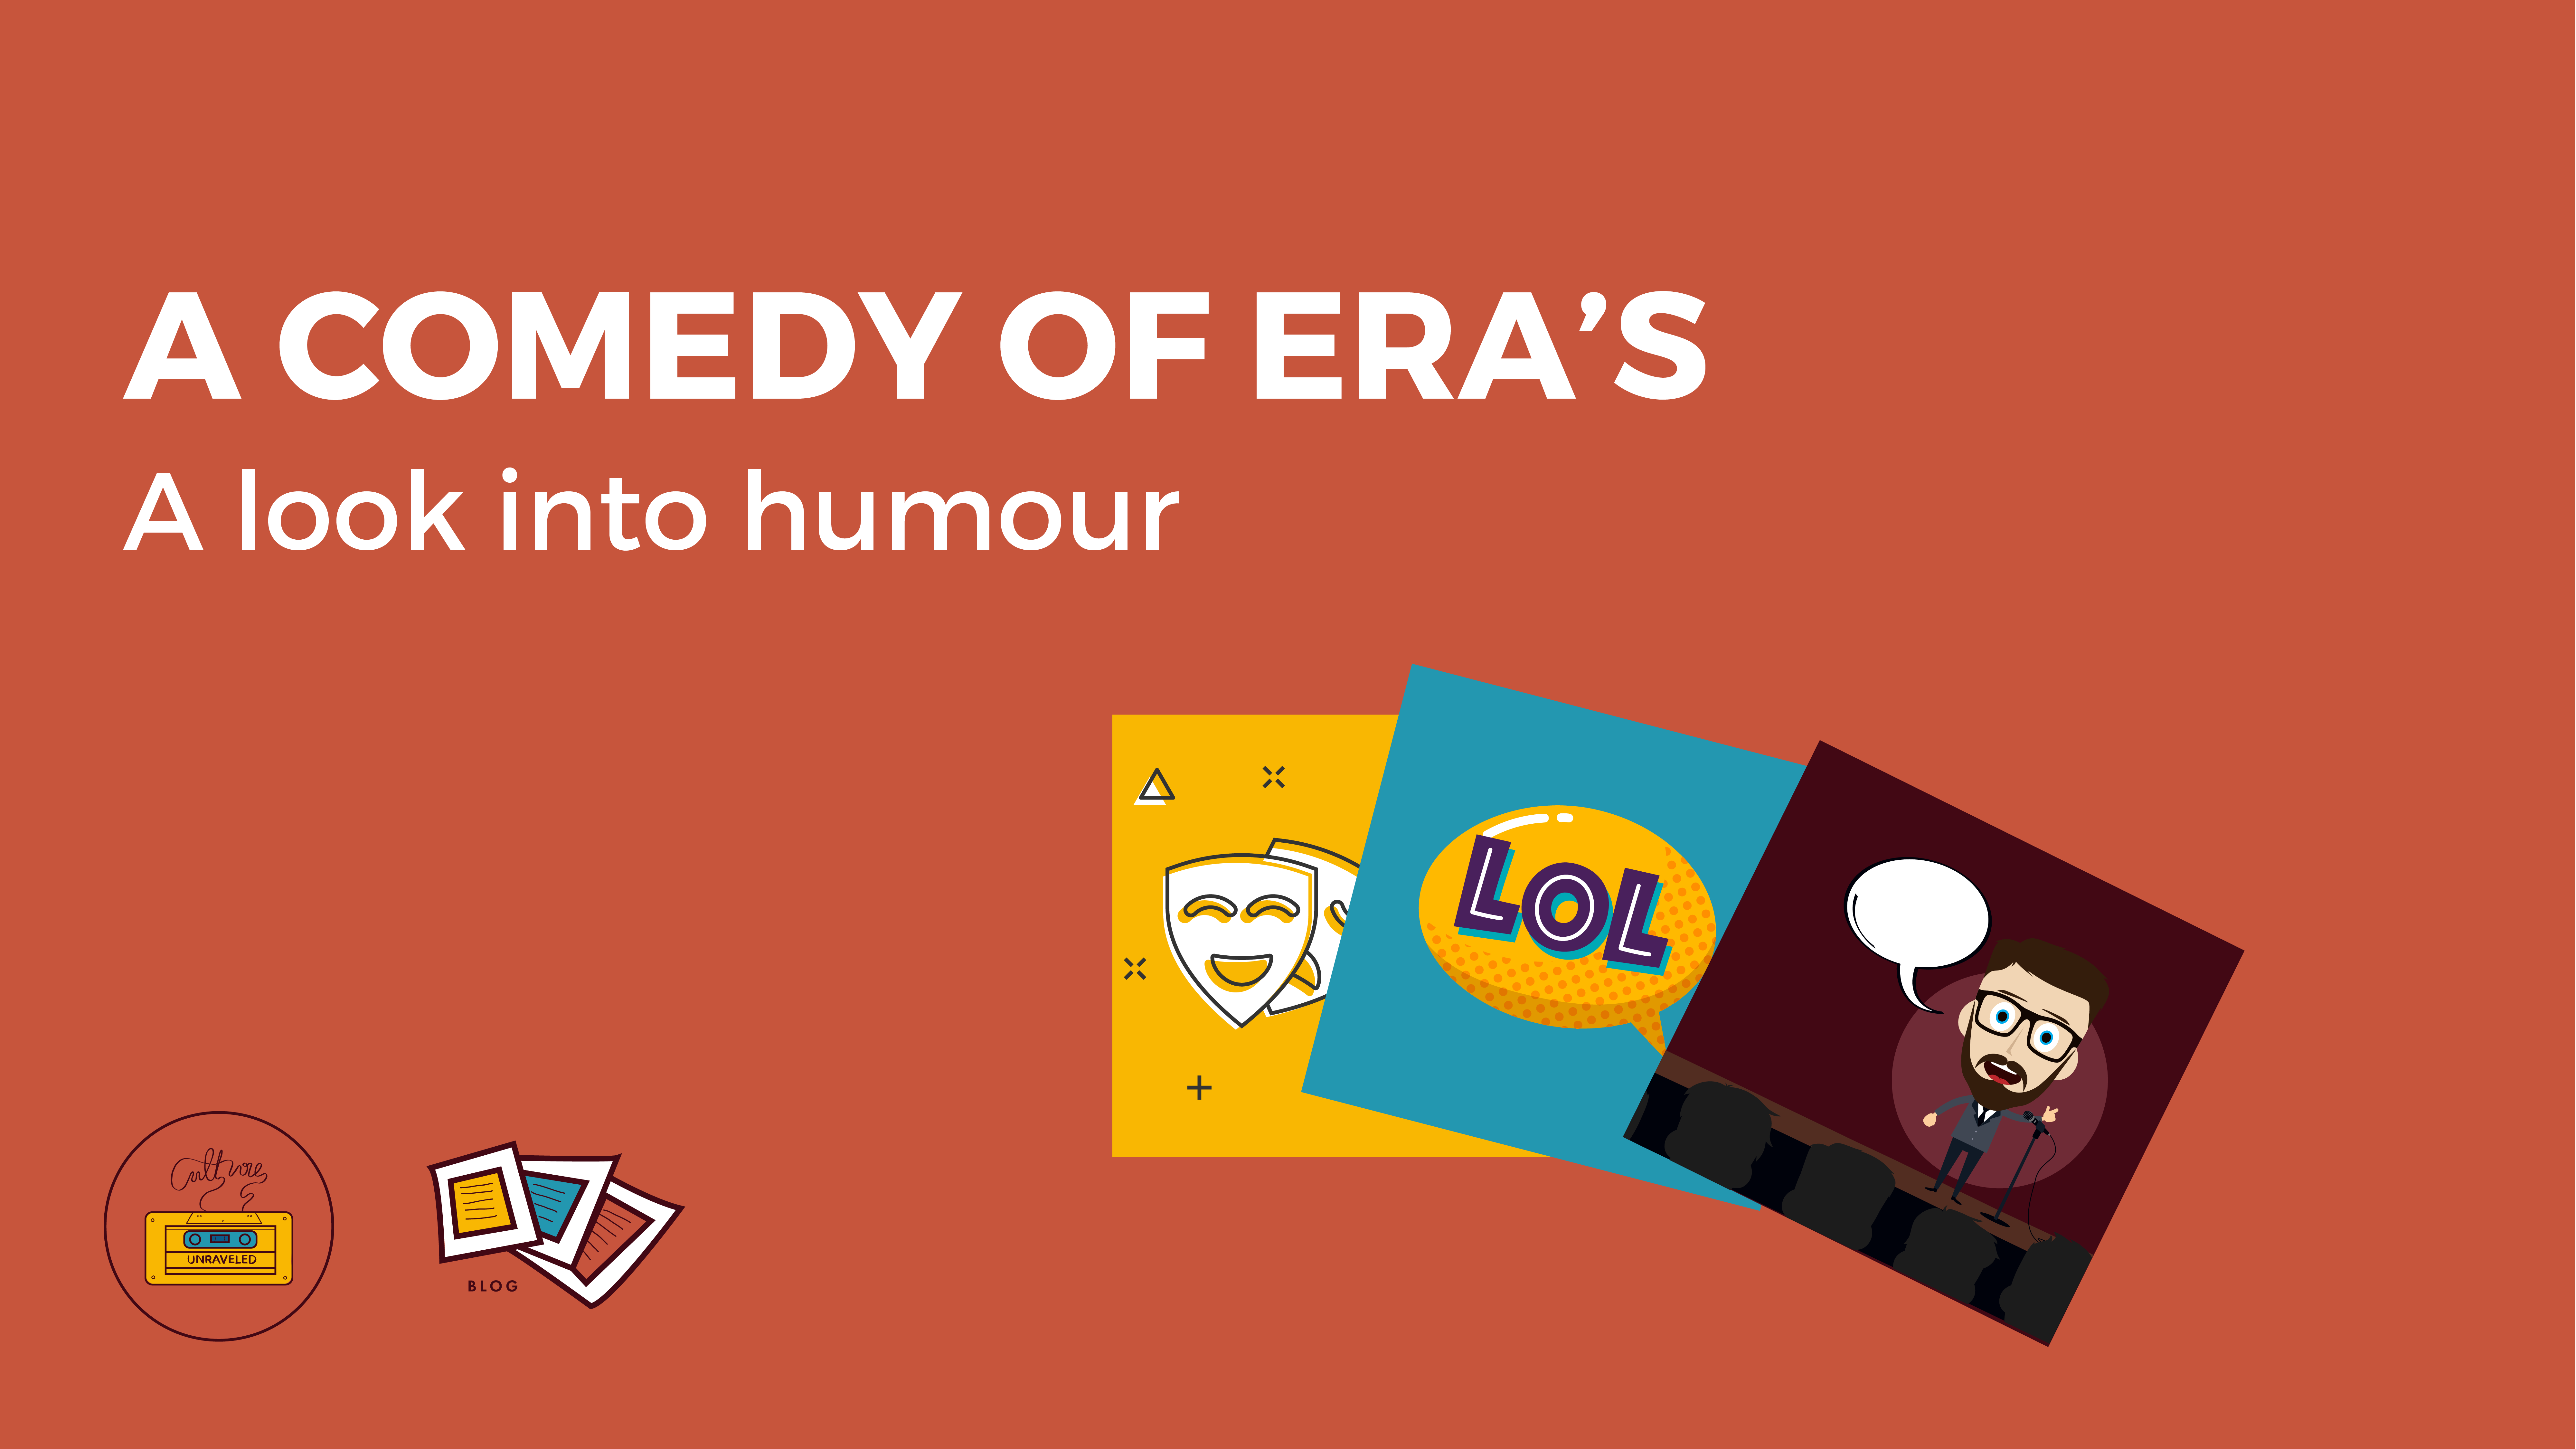 A Comedy of Era’s. A look into Humour